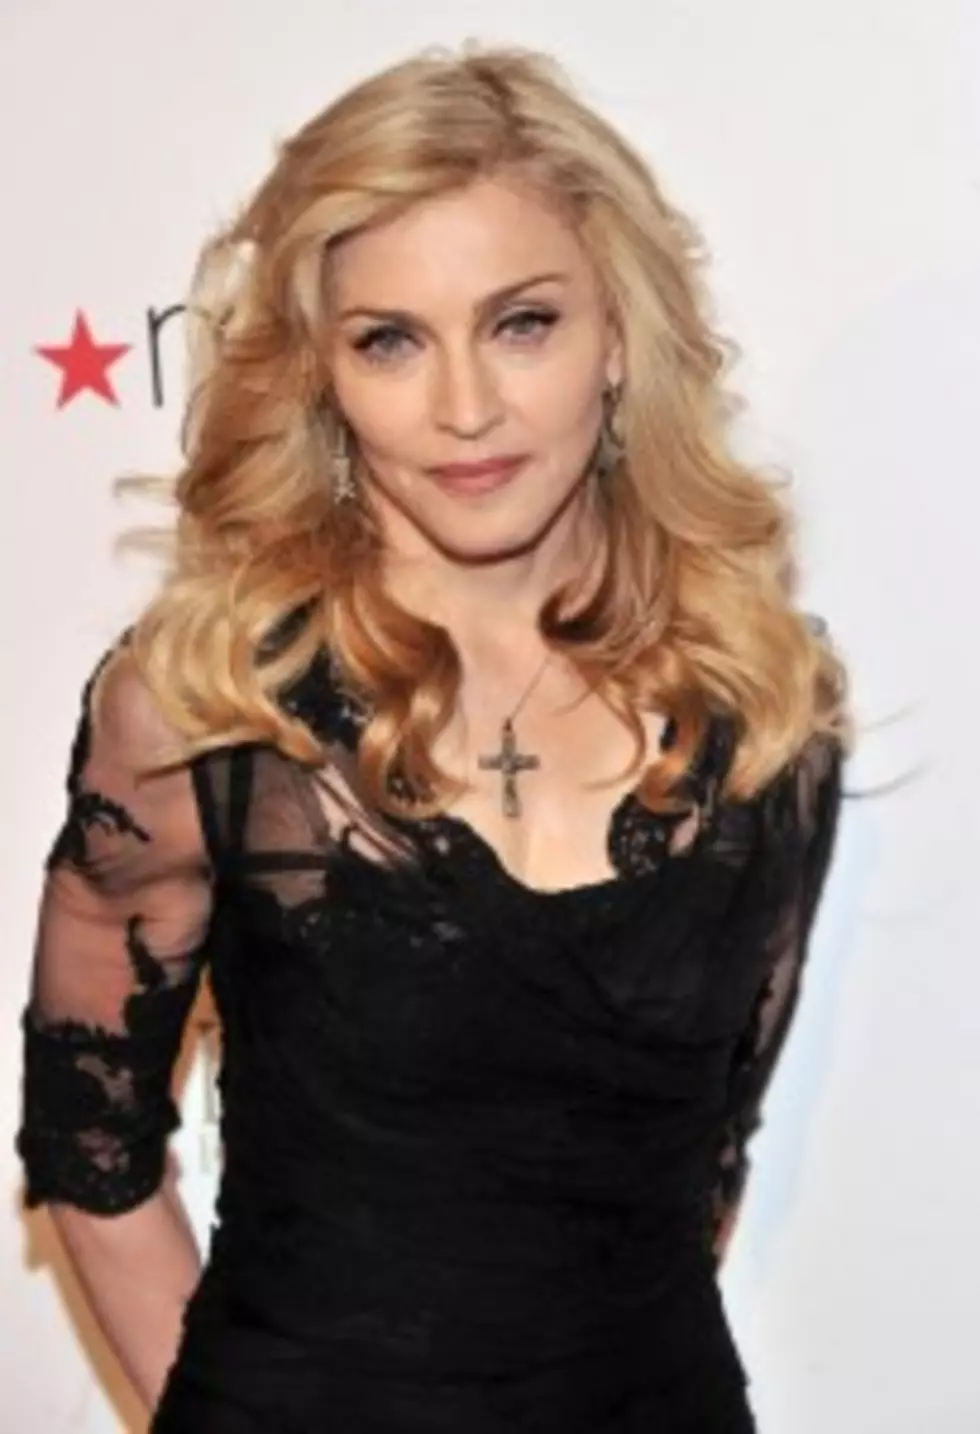 Madonna Poked Fun at Lady Gaga By Performing a Medley of &#8220;Express Yourself&#8221; and &#8220;Born This Way&#8221; [VIDEO]